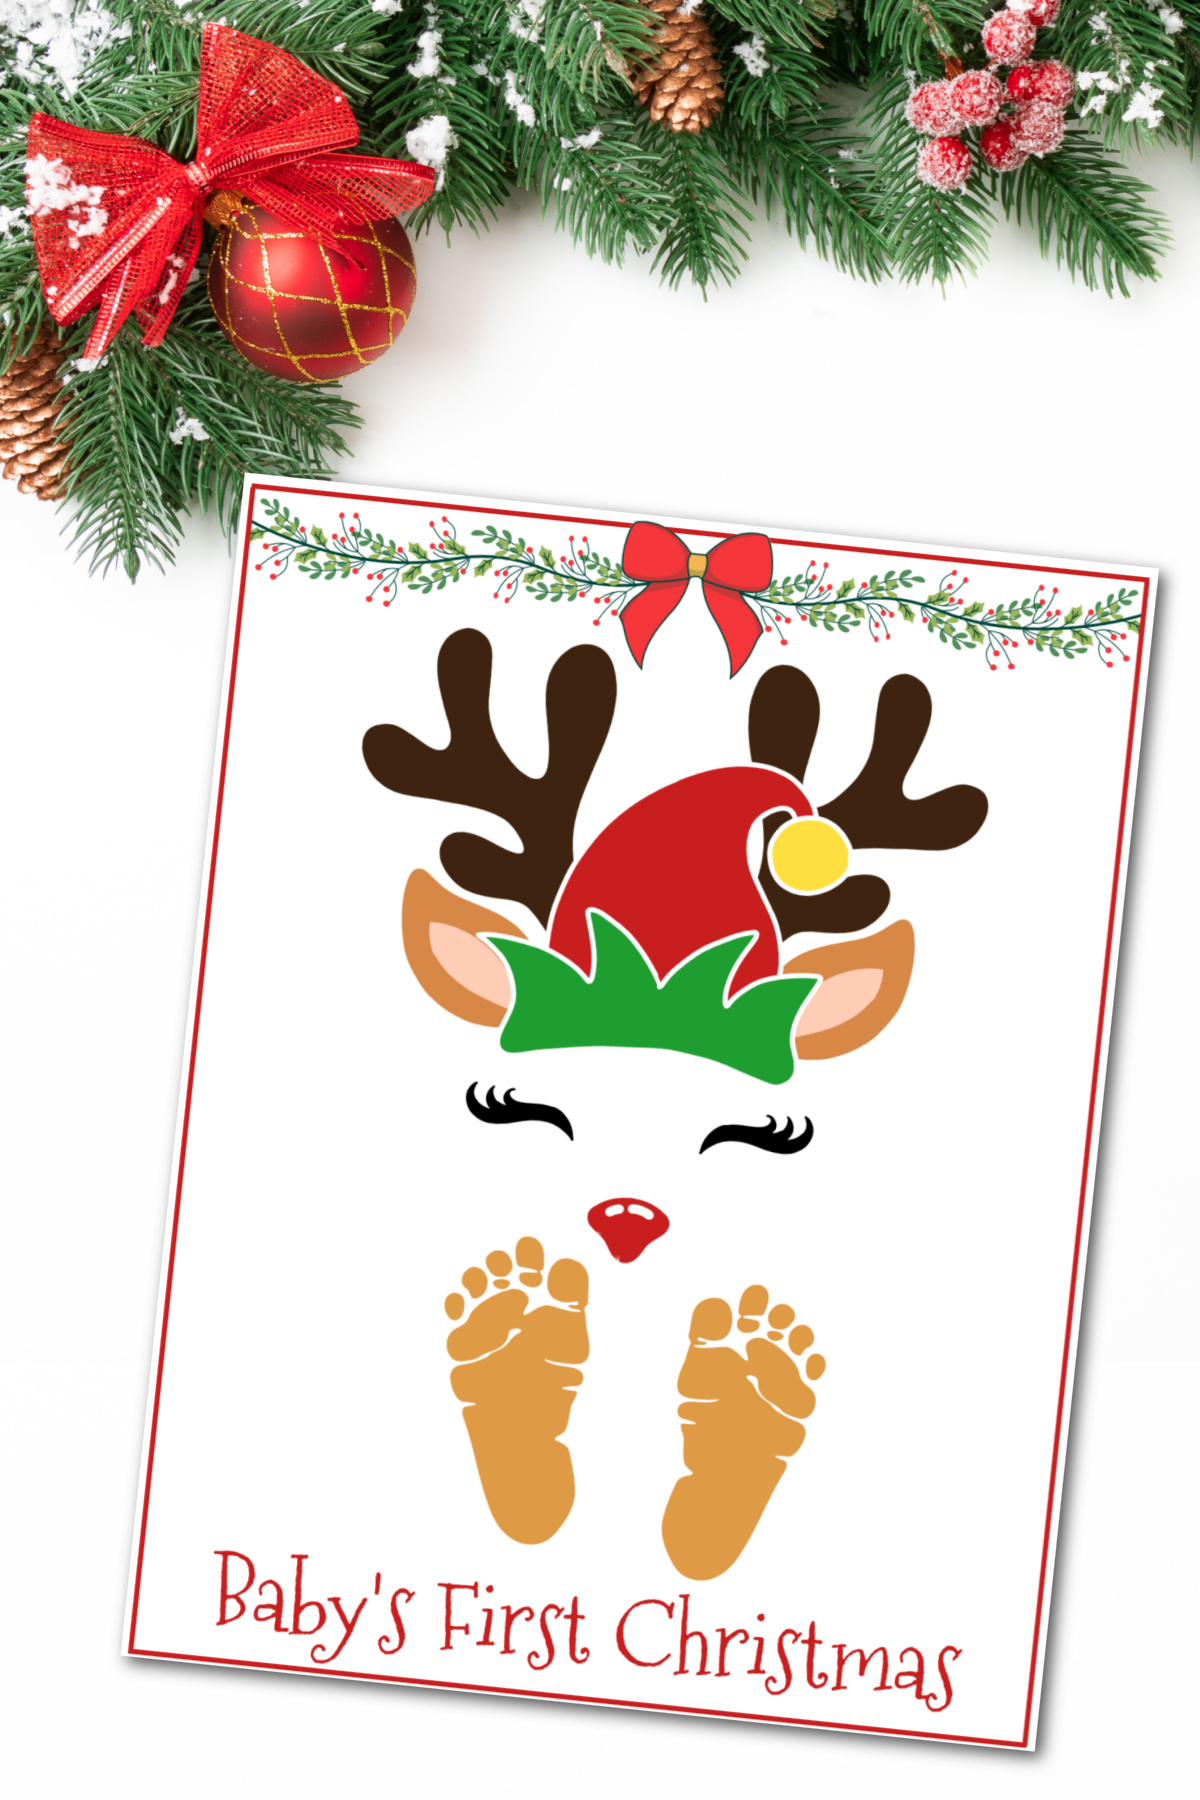 A baby's first christmas Reindeer art with baby feet